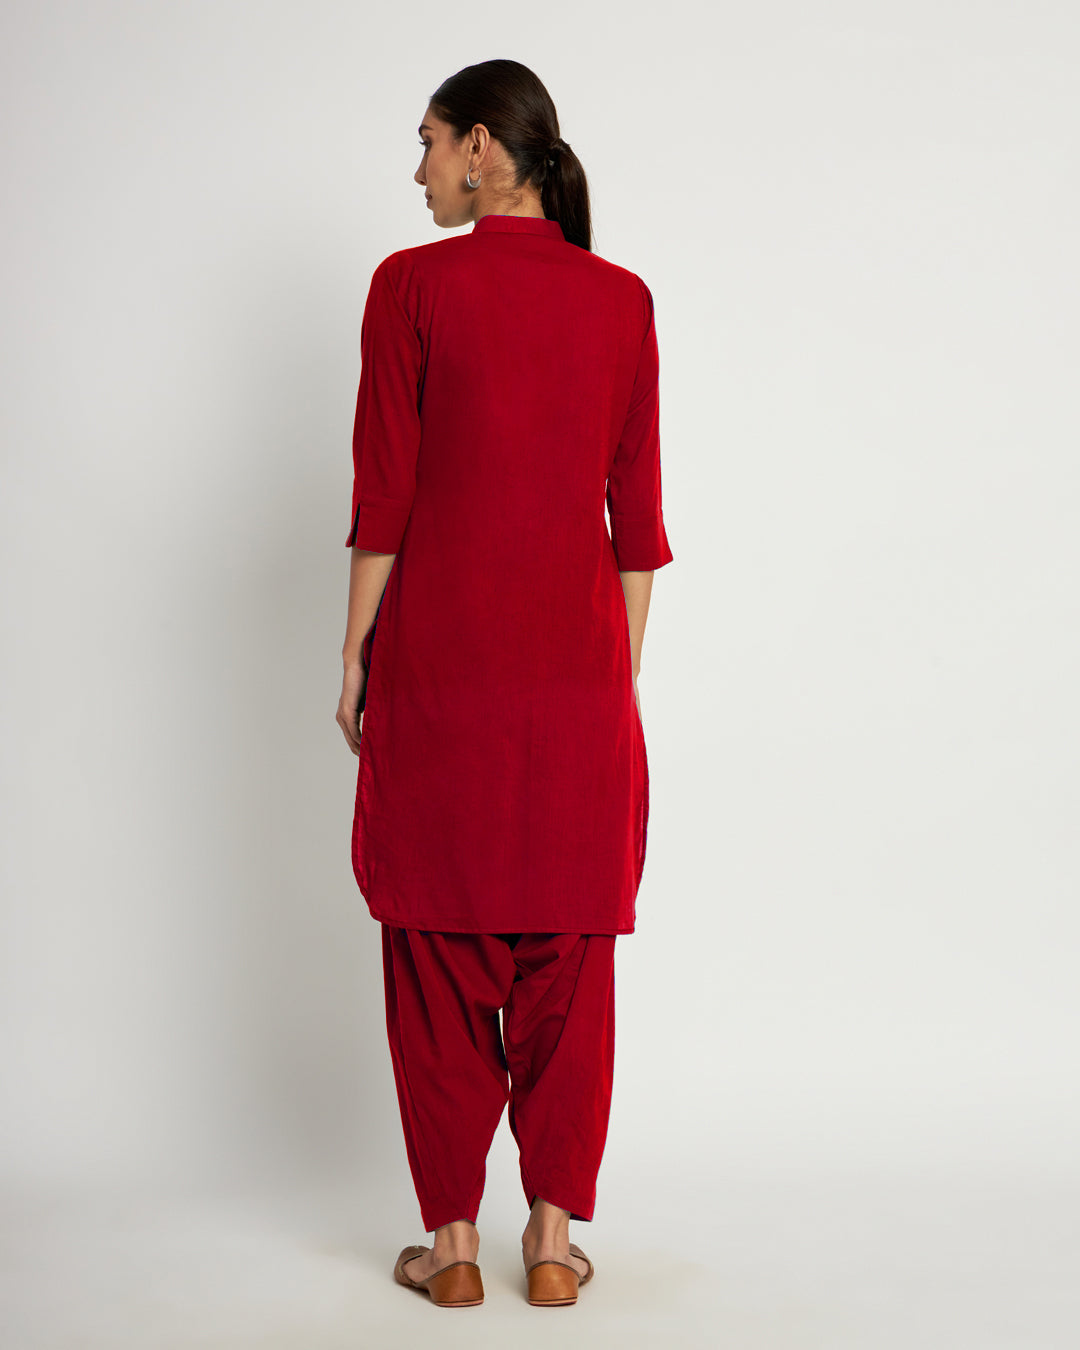 Classic Red Band Collar Neck Solid Kurta (Without Bottoms)